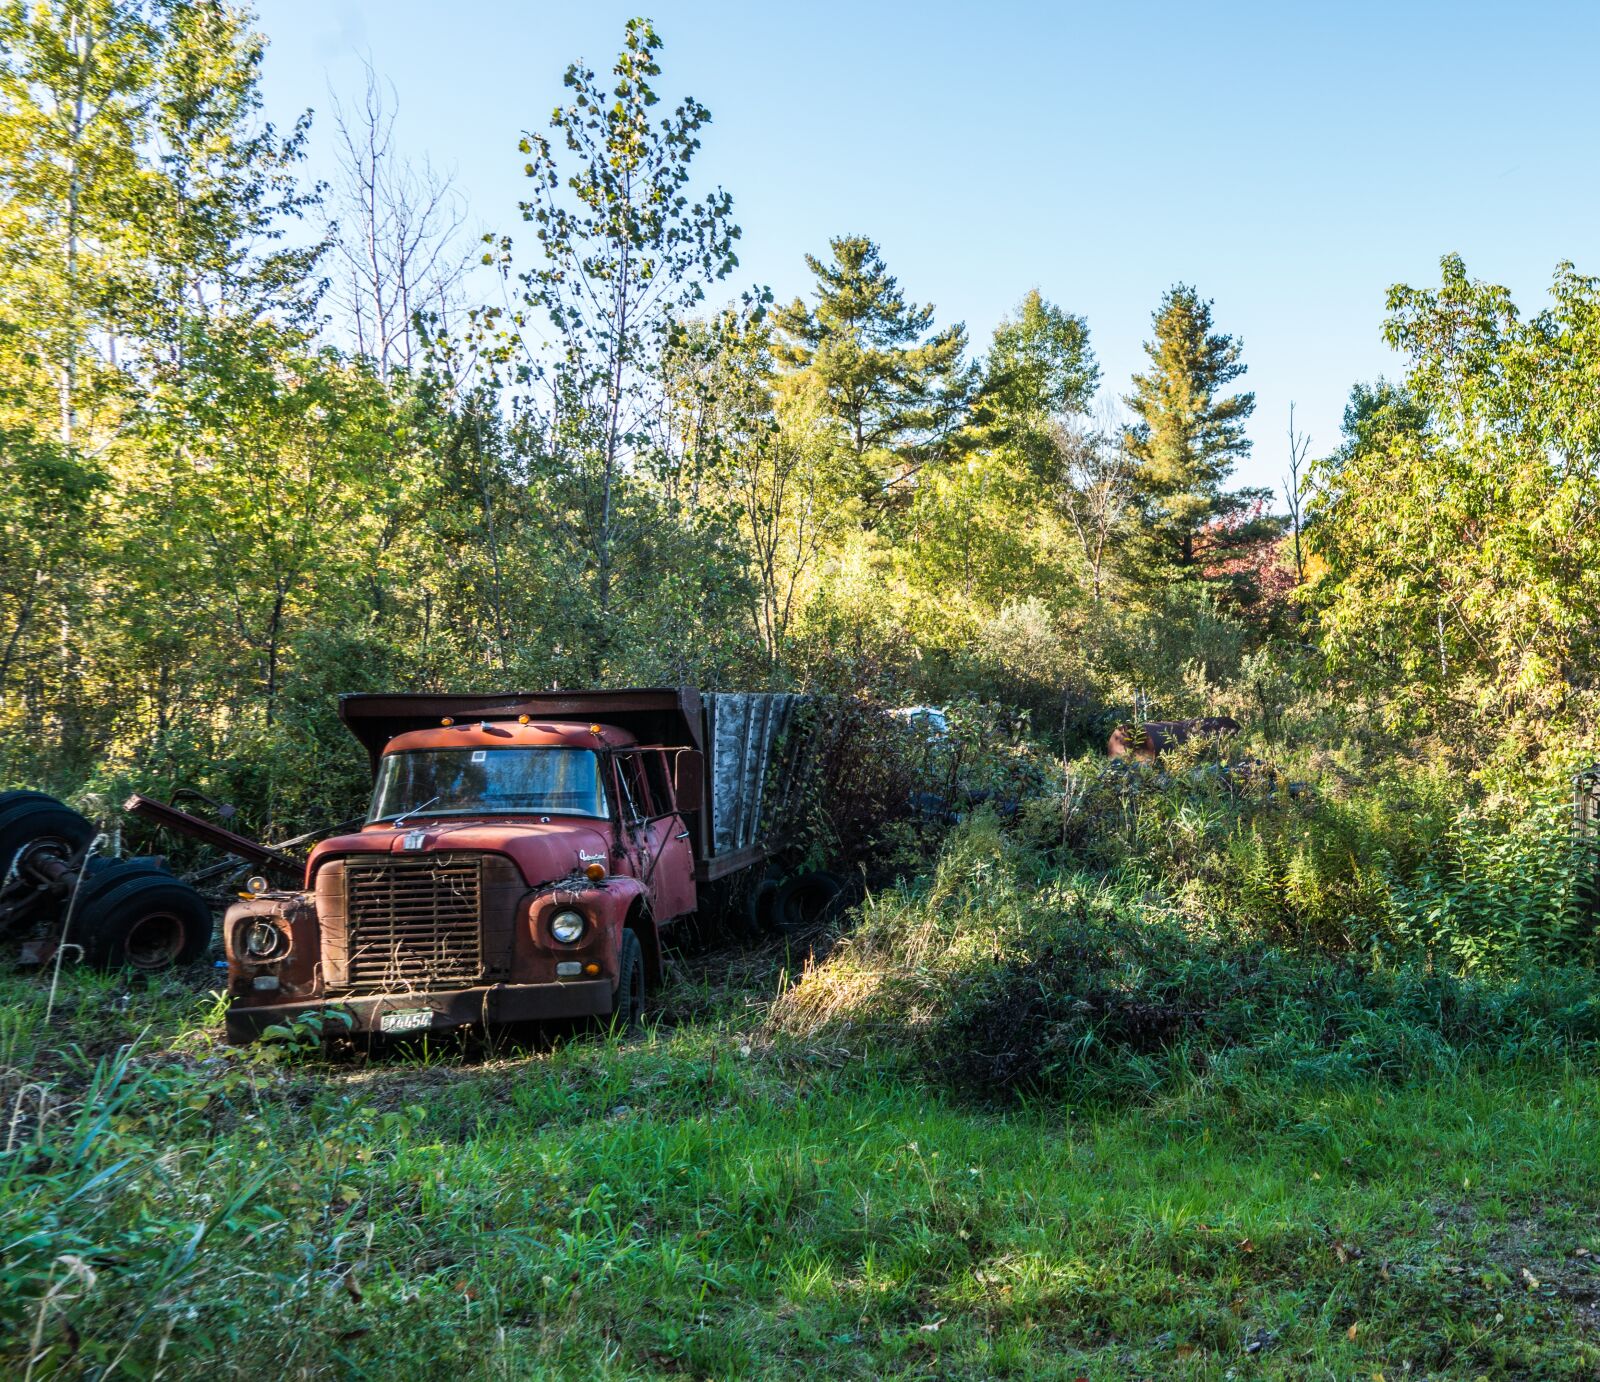 Sony a7R II sample photo. Truck, rustic, rural photography